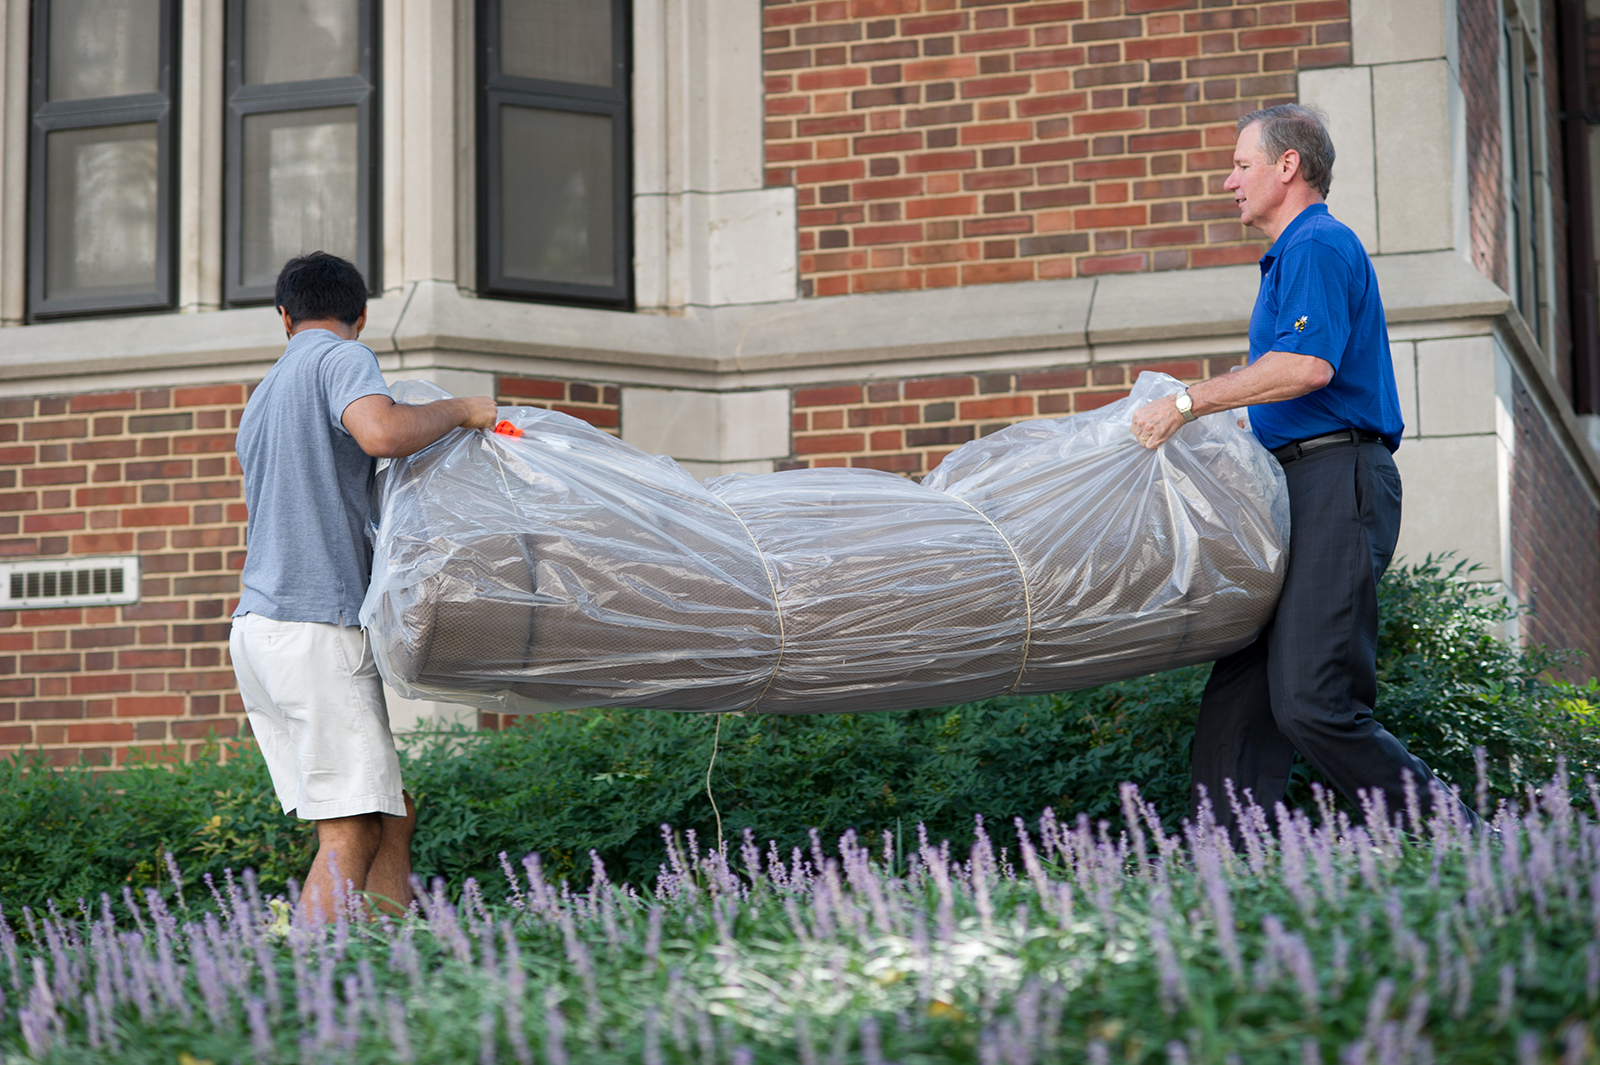 President G.P. "Bud" Peterson (right) helps with move-in in 2012